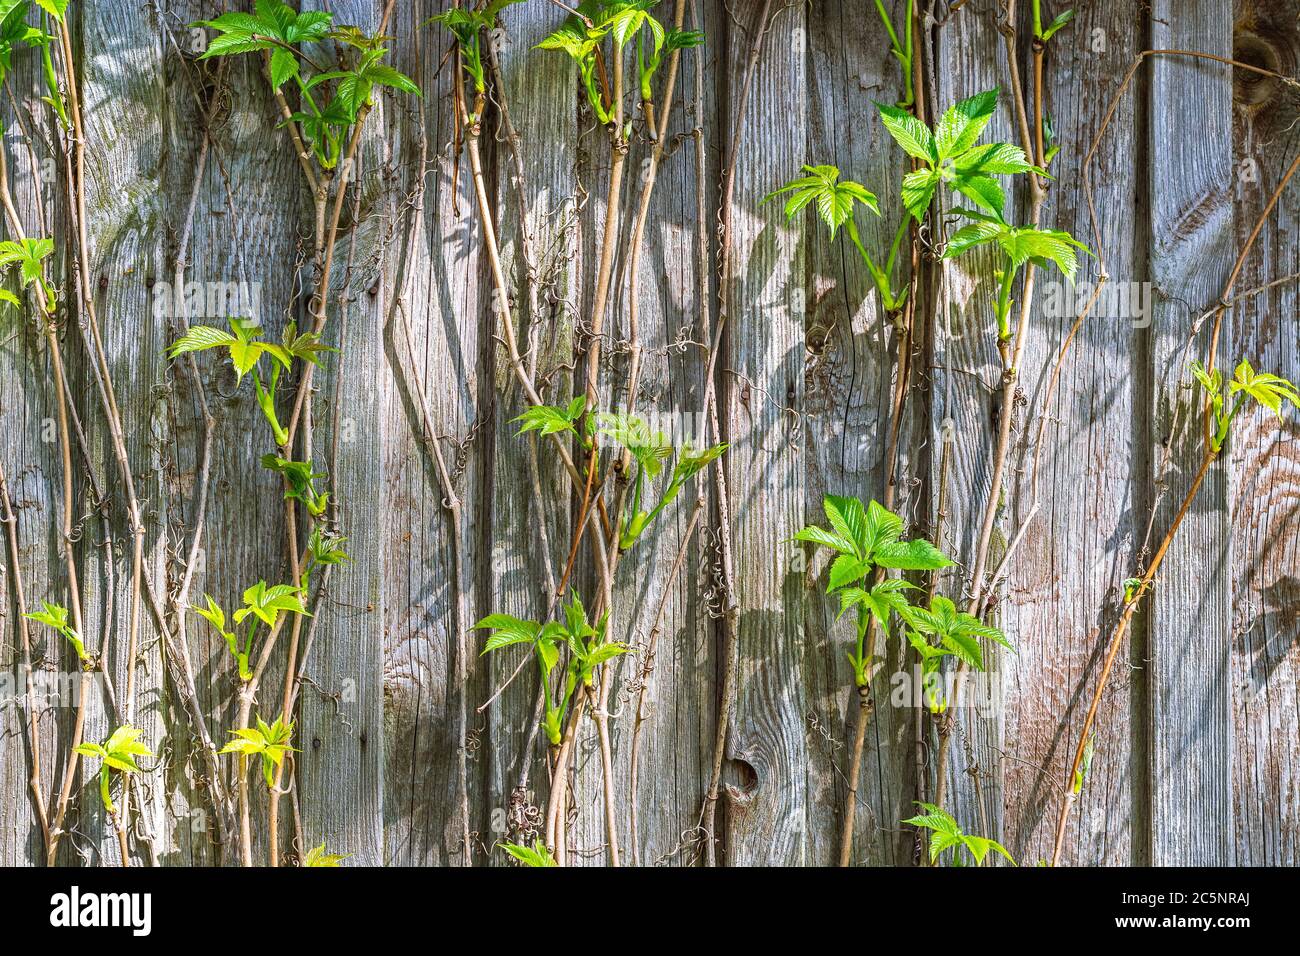 Stems of a winding plant of ladies' grapes with young green leaves on the wall from old boards. For use as an abstract background and texture. Stock Photo